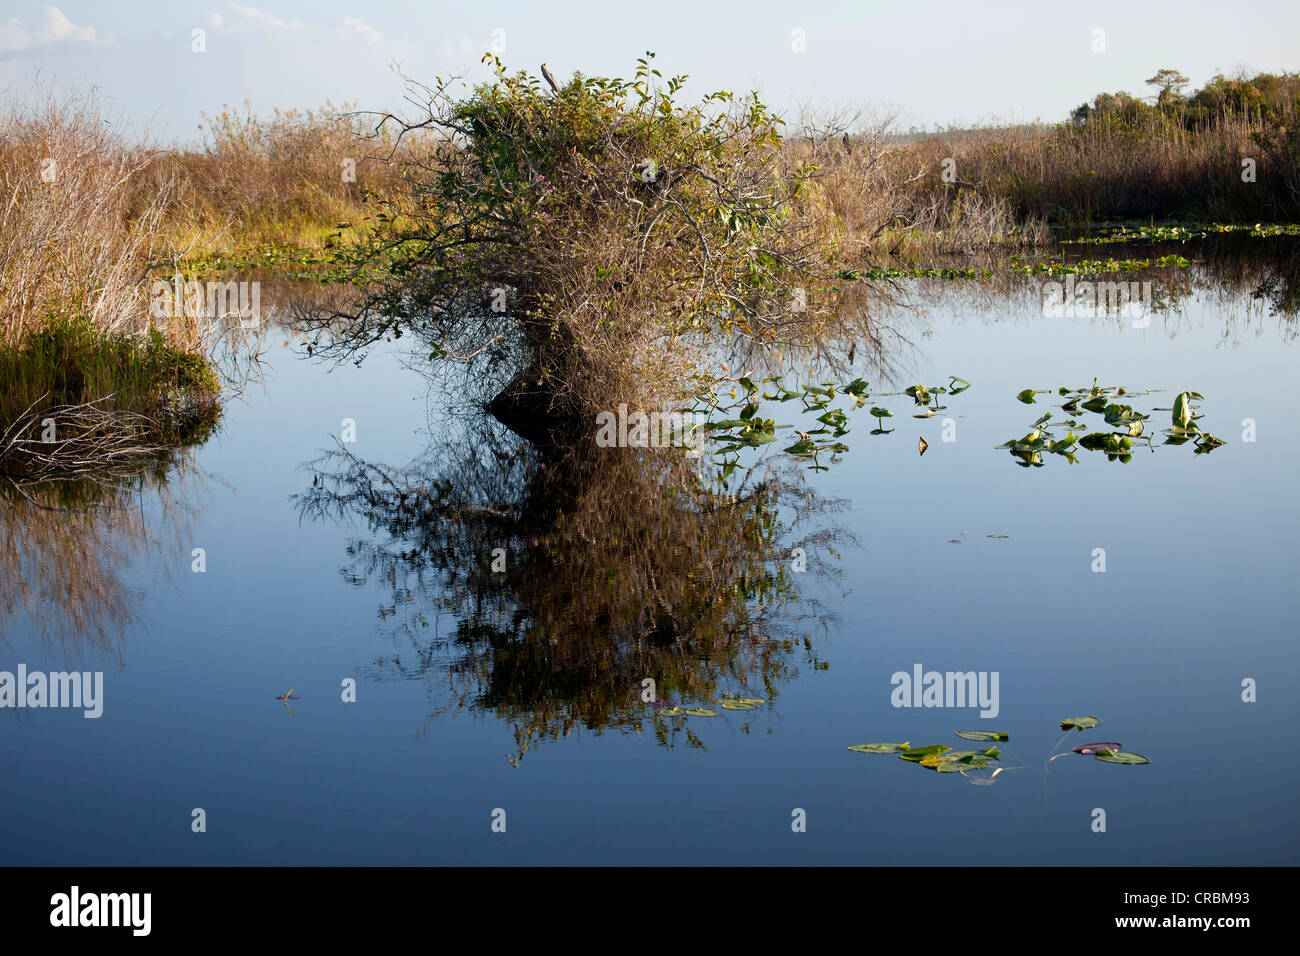 Typical vegetation along the Anhinga Trail reflected in the water, Everglades National Park in Florida, USA Stock Photo